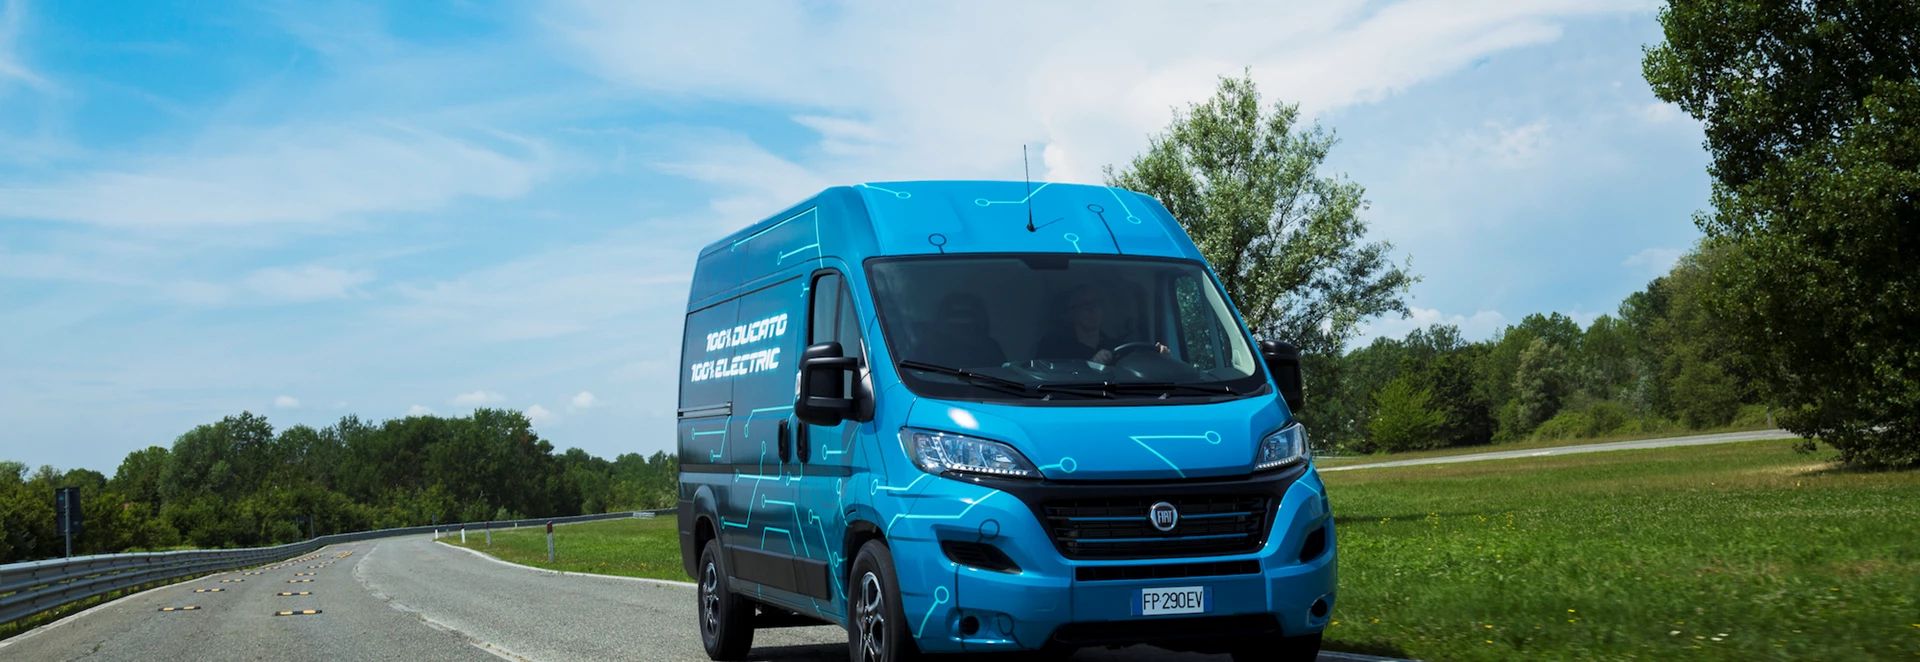  Fiat Ducato Electric van 2020 - details and specs revealed 